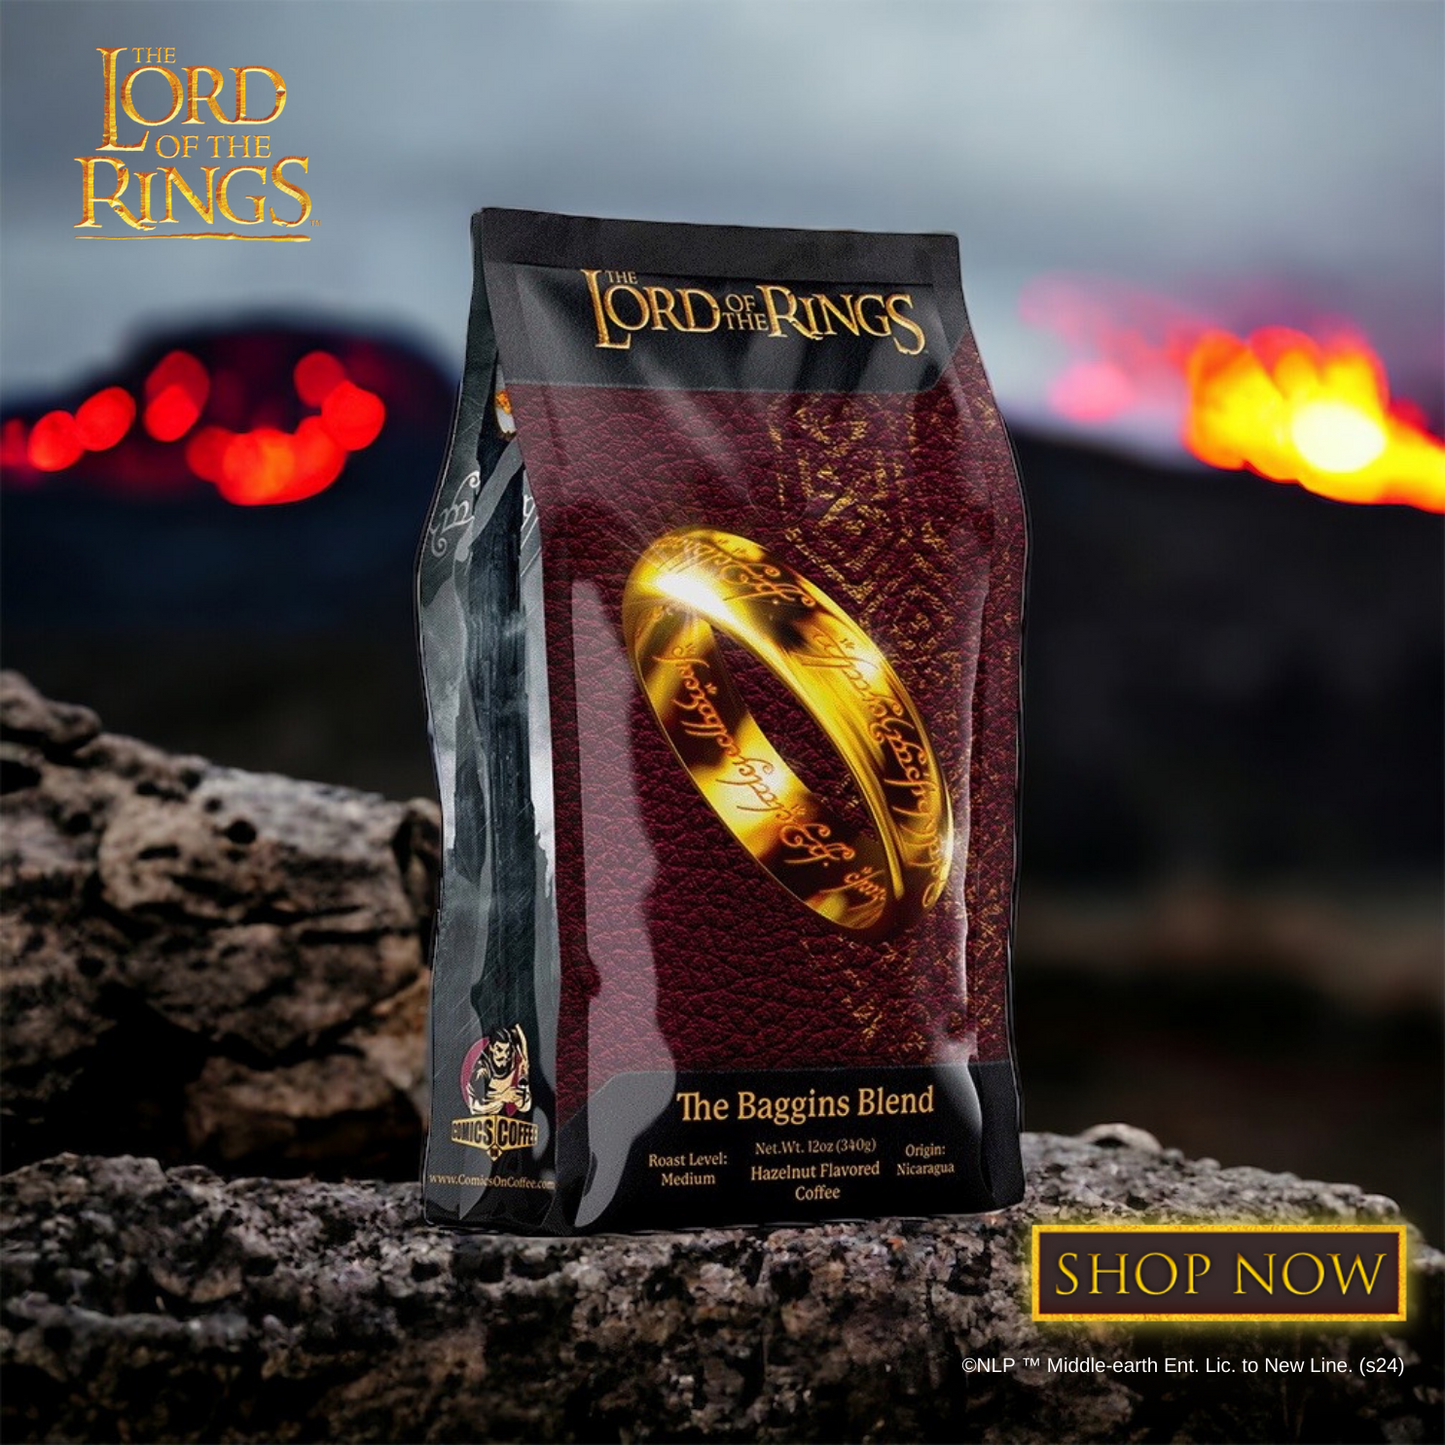 The Lord Of The Rings: The Baggins Blend